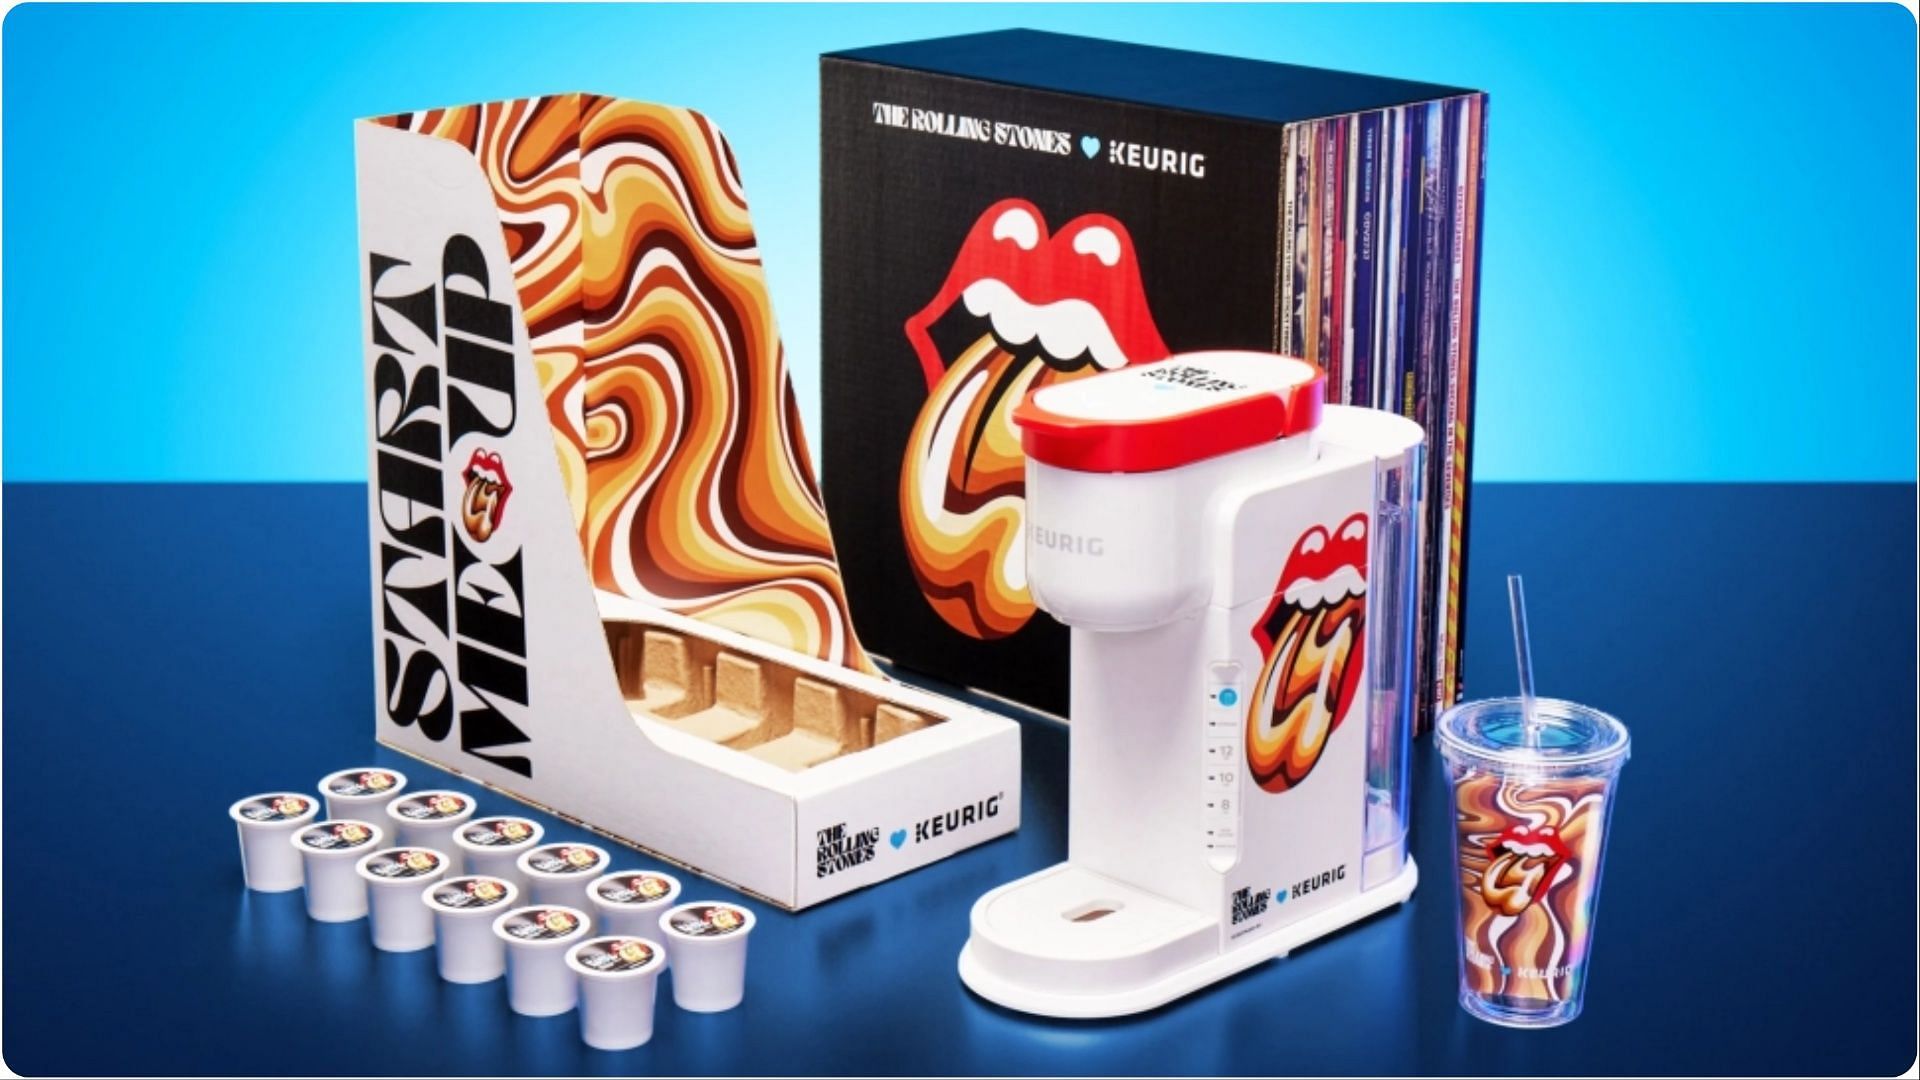 The Rolling Stones and Keurig collaborate for the launch of the new &ldquo;Start Me Up&rdquo; Coffee Kit (Image via Kreuig/The Rolling Stones)